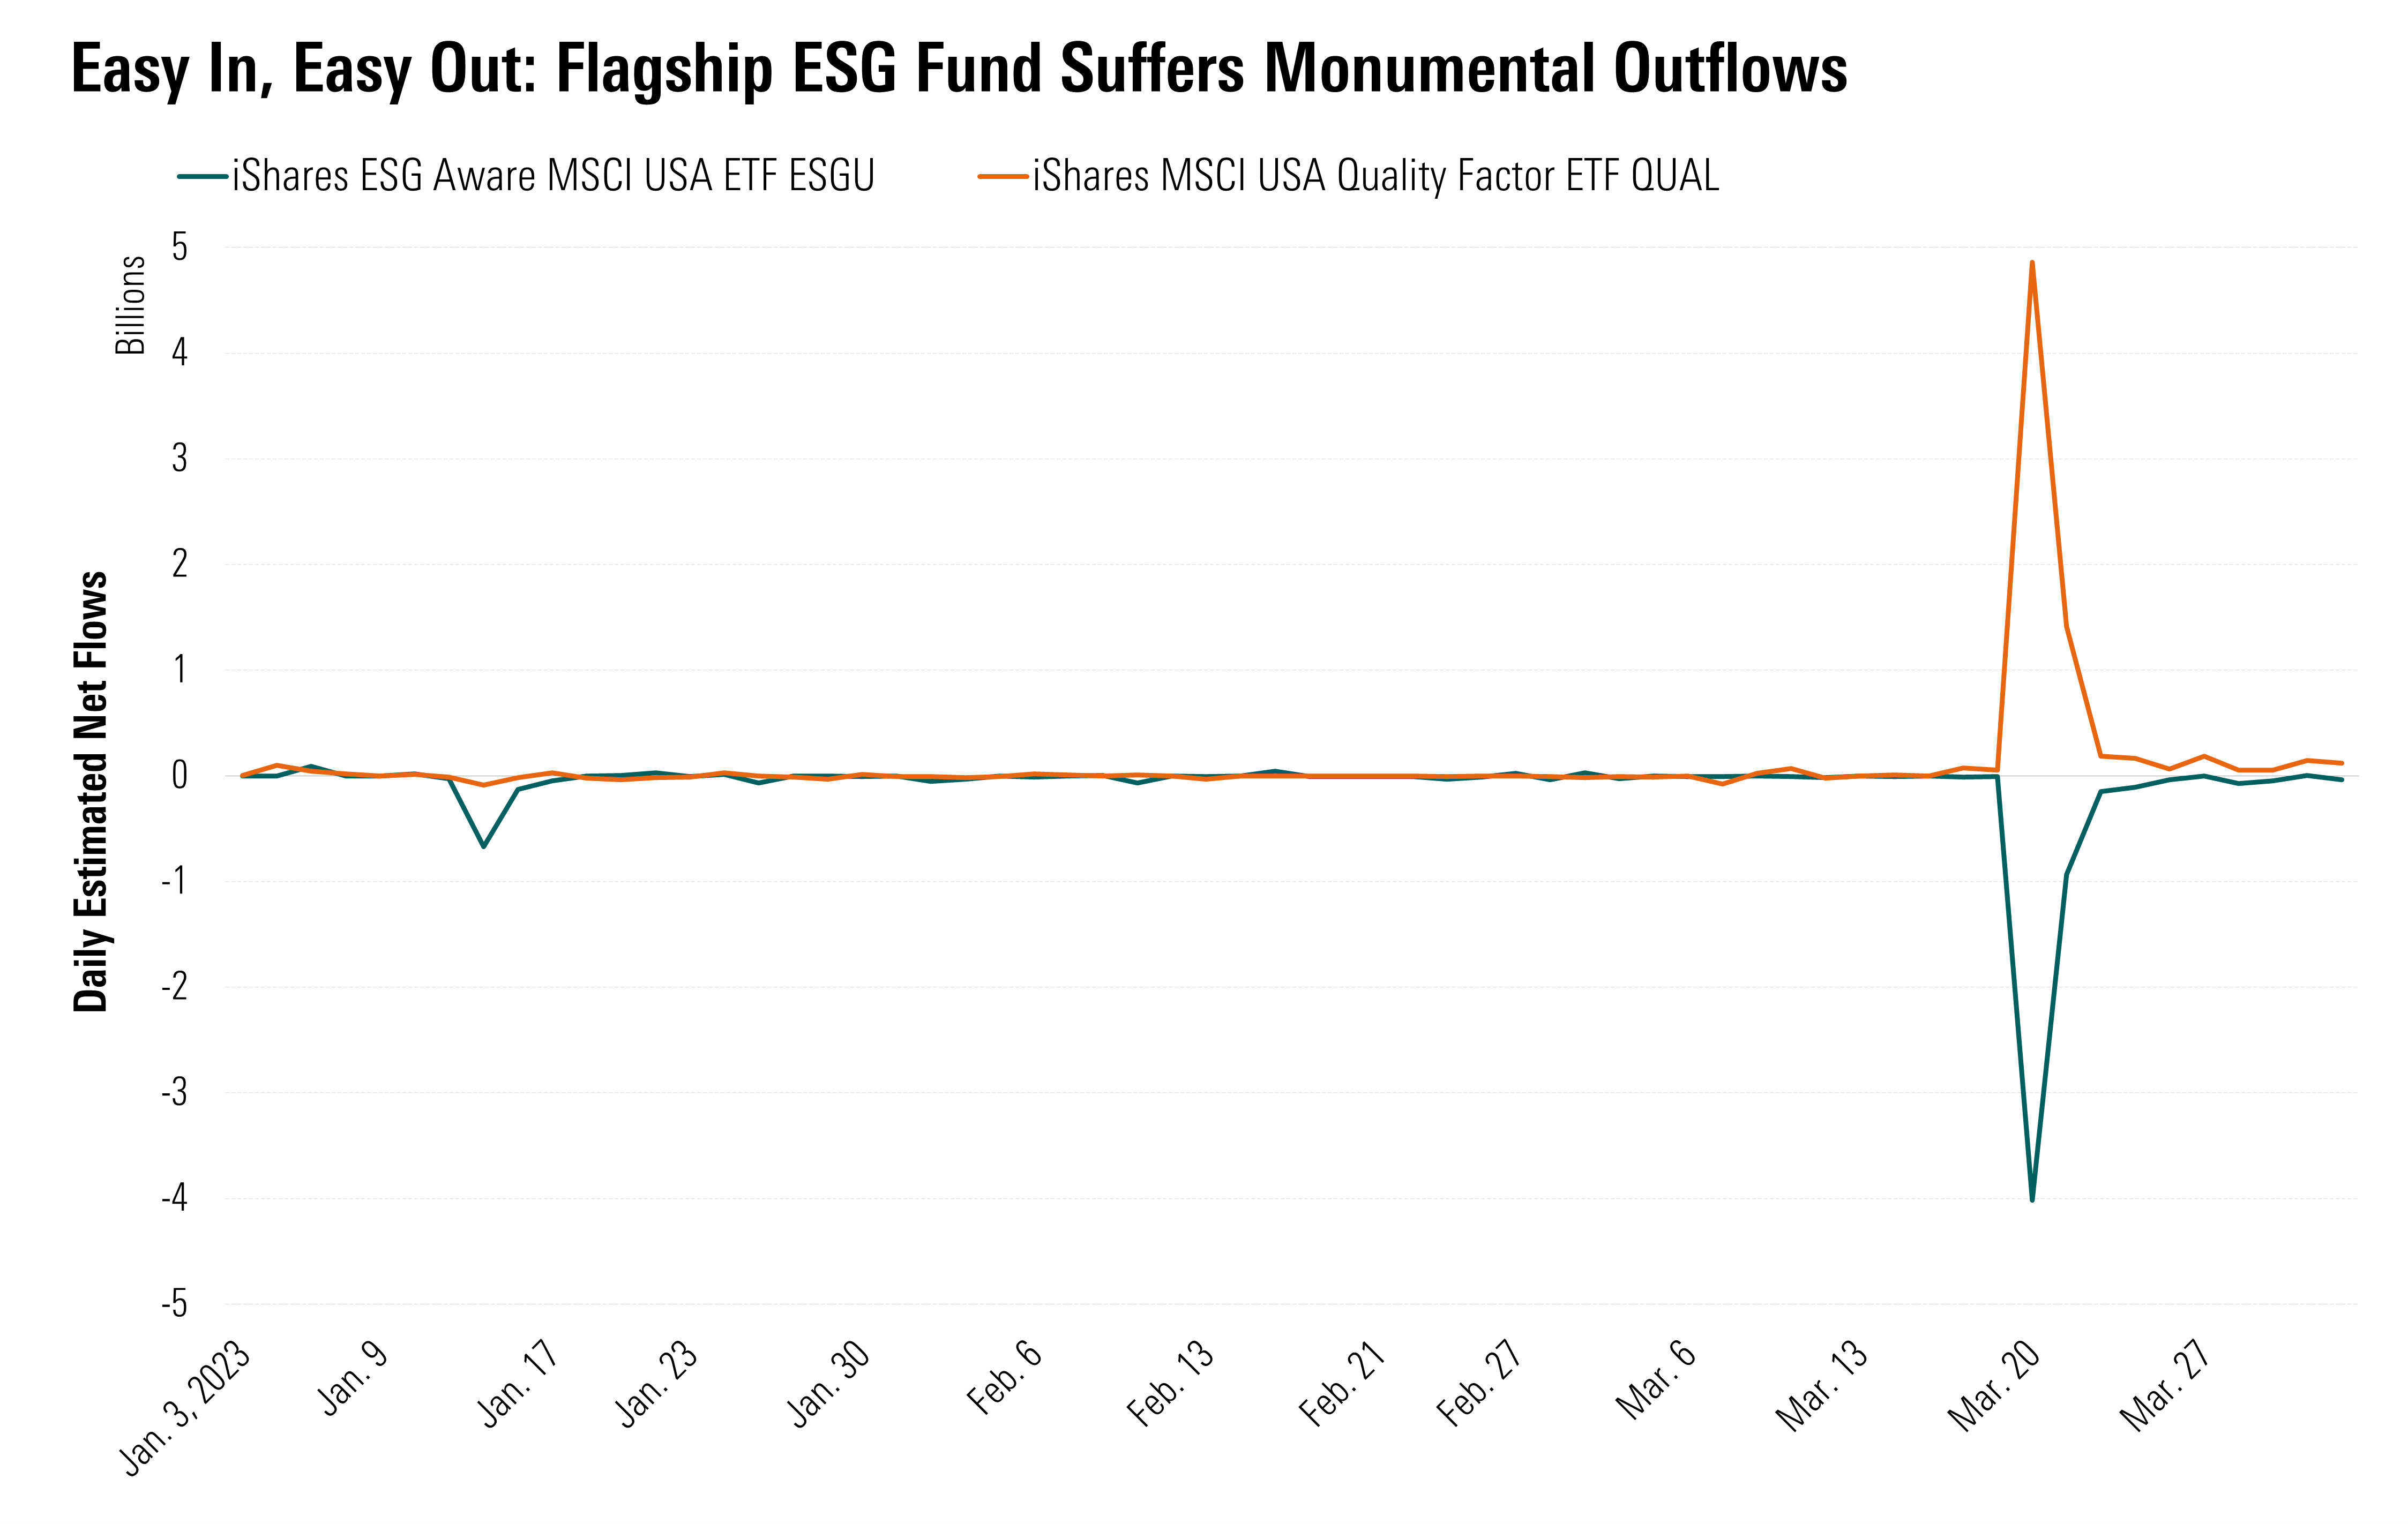 Line chart showing outflows from iShares ESG Aware MSCI USA ETF mirroring inflows to iShares MSCI USA Quality Factor ETF.